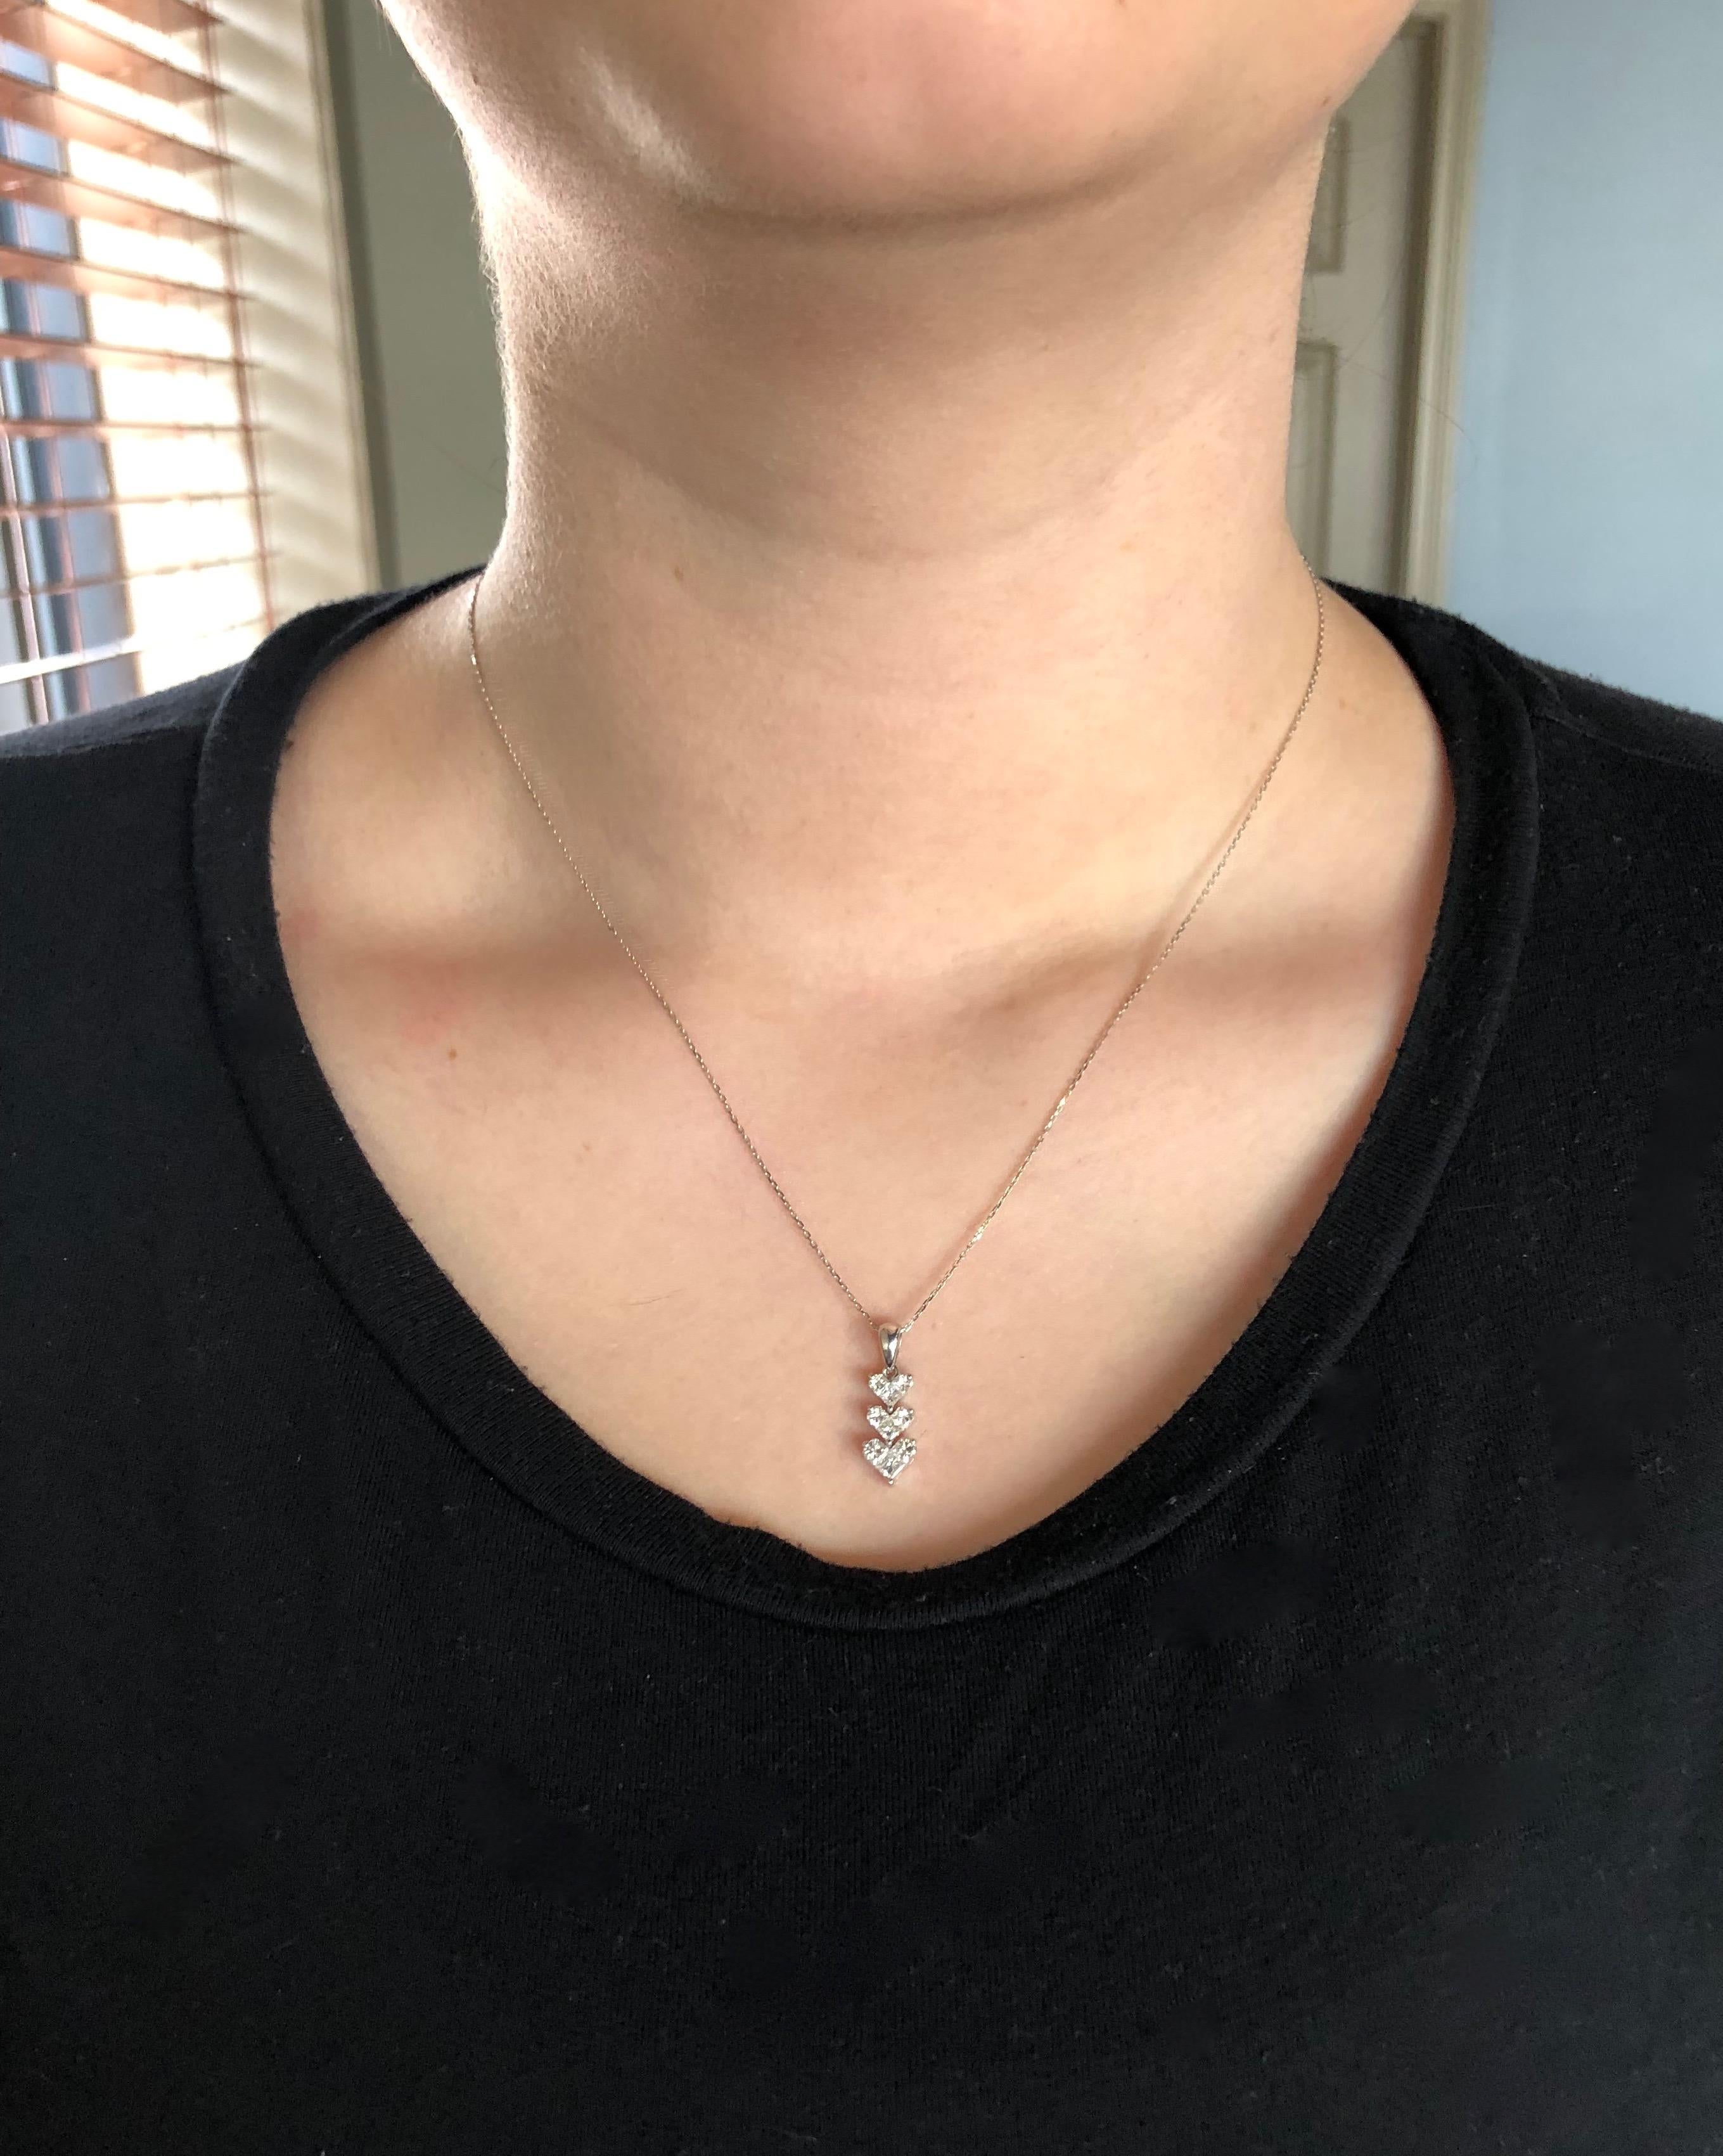 This unique necklace features three stunning invisible set heart shaped diamonds set in an elegant drop. 

Diamond Carat Weight: .83CTW
Diamond Cut: 3 Princess Cut, 6 Fancy Cut Half Round
Color: Average G-I
Clarity: Average VS
Metal: 18K White